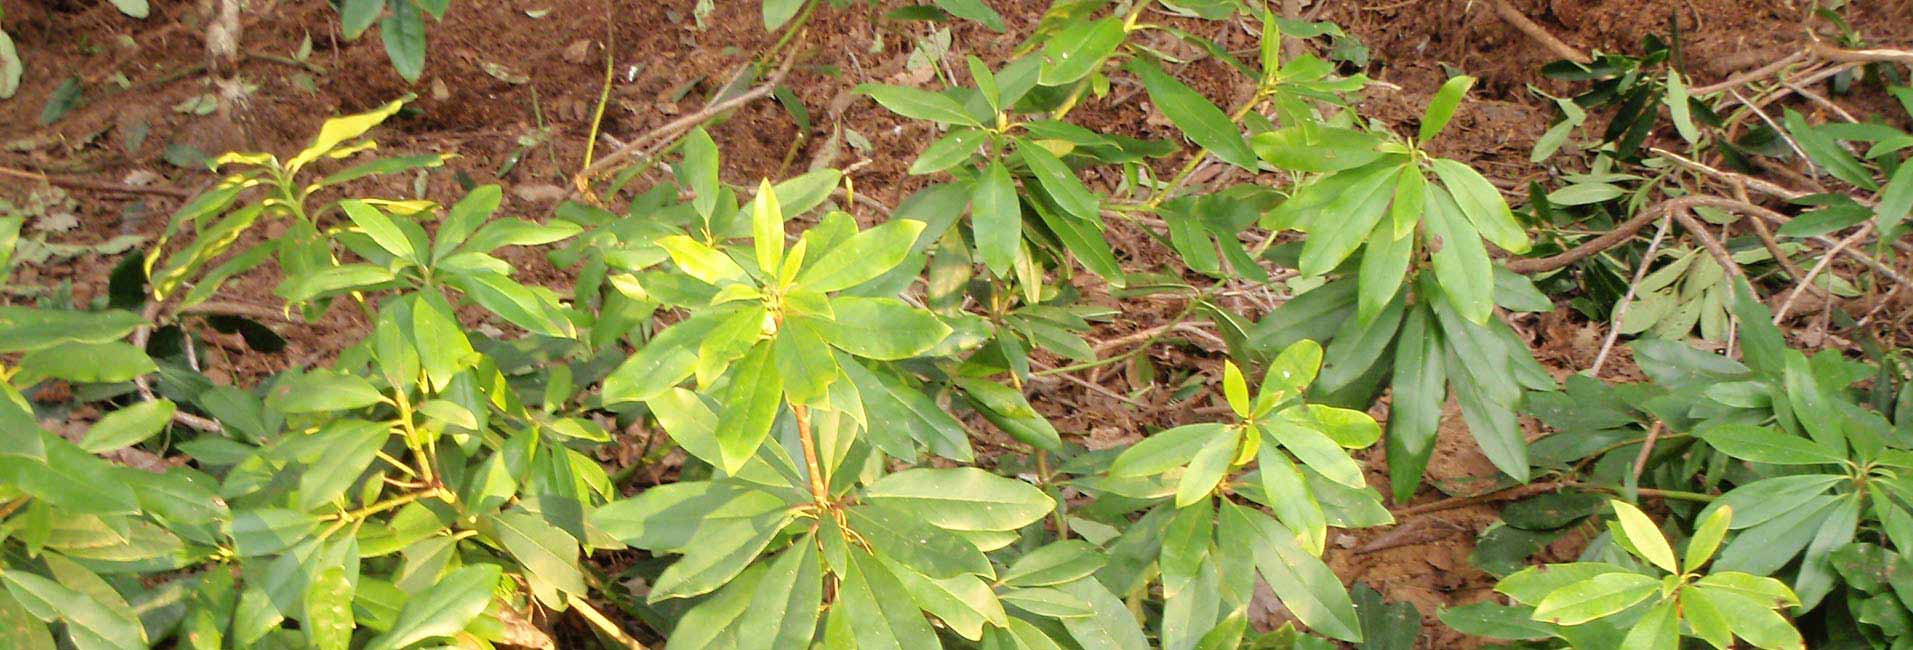 Rhododendron Control